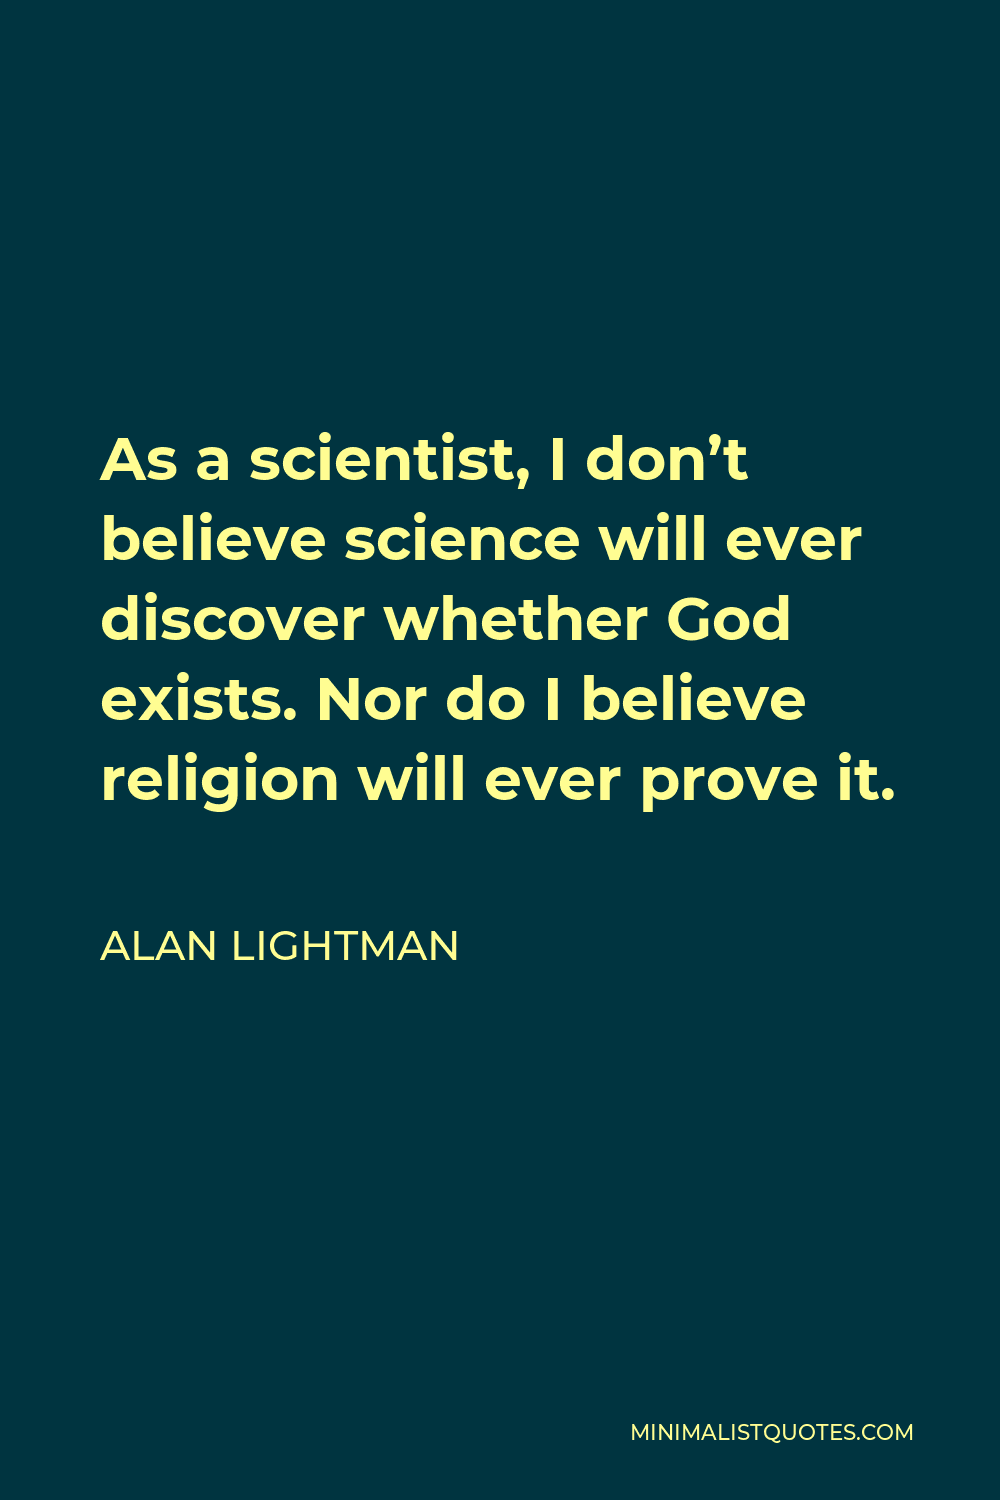 Alan Lightman Quote - As a scientist, I don’t believe science will ever discover whether God exists. Nor do I believe religion will ever prove it.